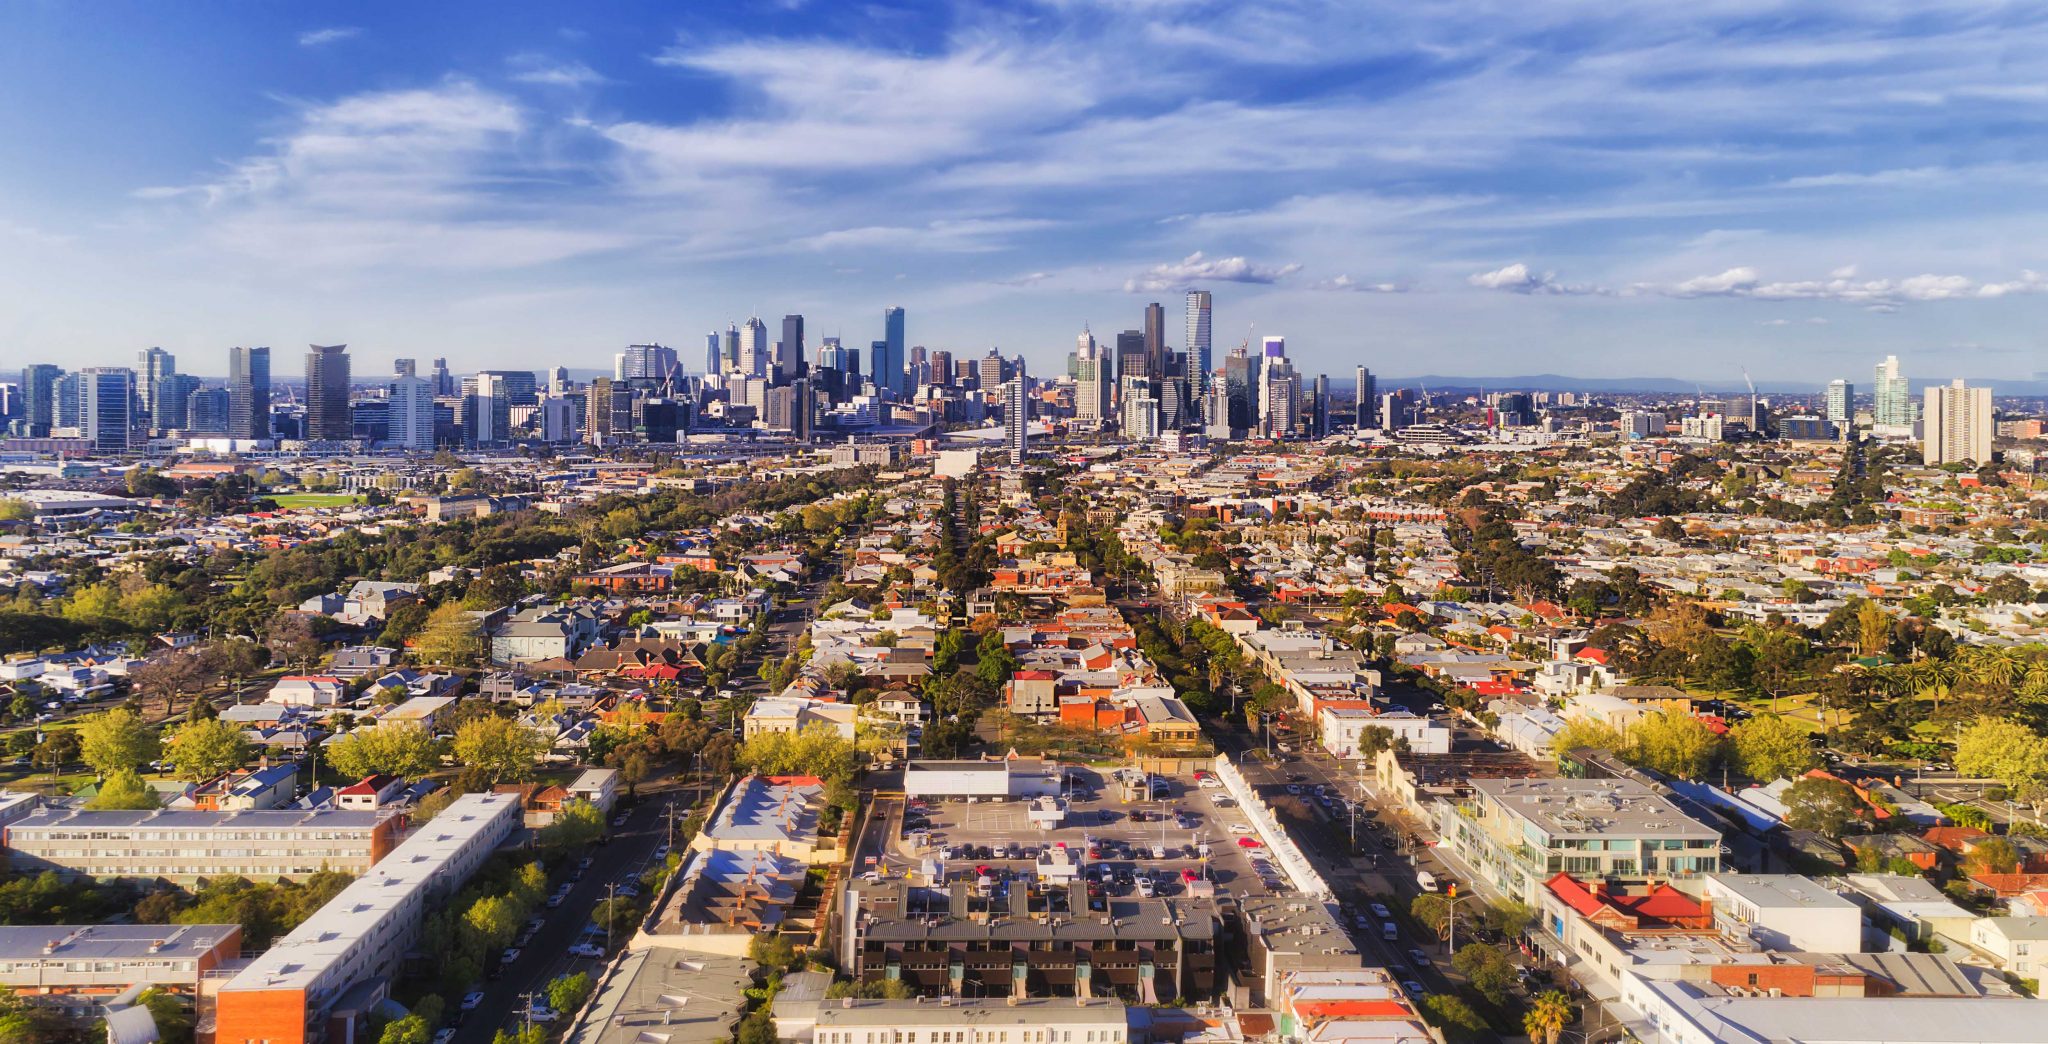 Investors ‘listen in’ as population boom drives demand and investment opportunities in Melbourne